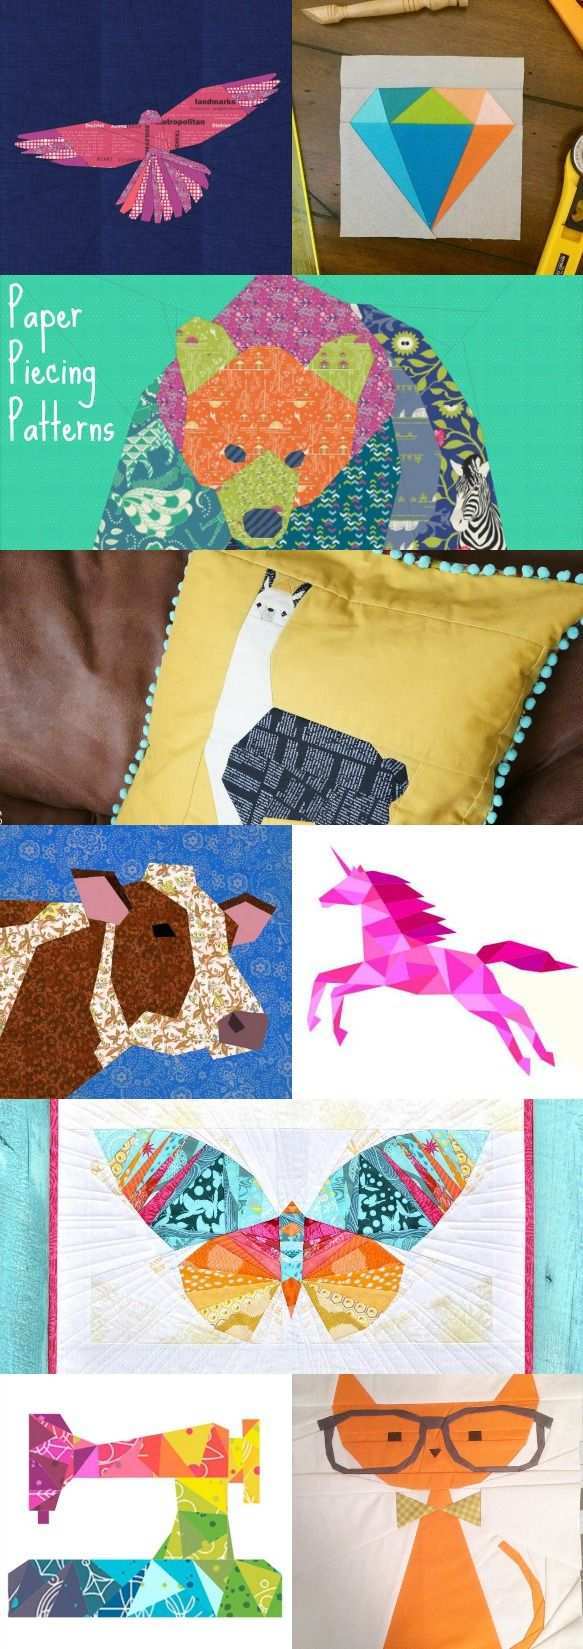 Free Paper Piecing Patterns To Download And Sew Free Paper Piecing Patterns Foundation Paper Piecing Patterns Paper Pieced Quilt Patterns